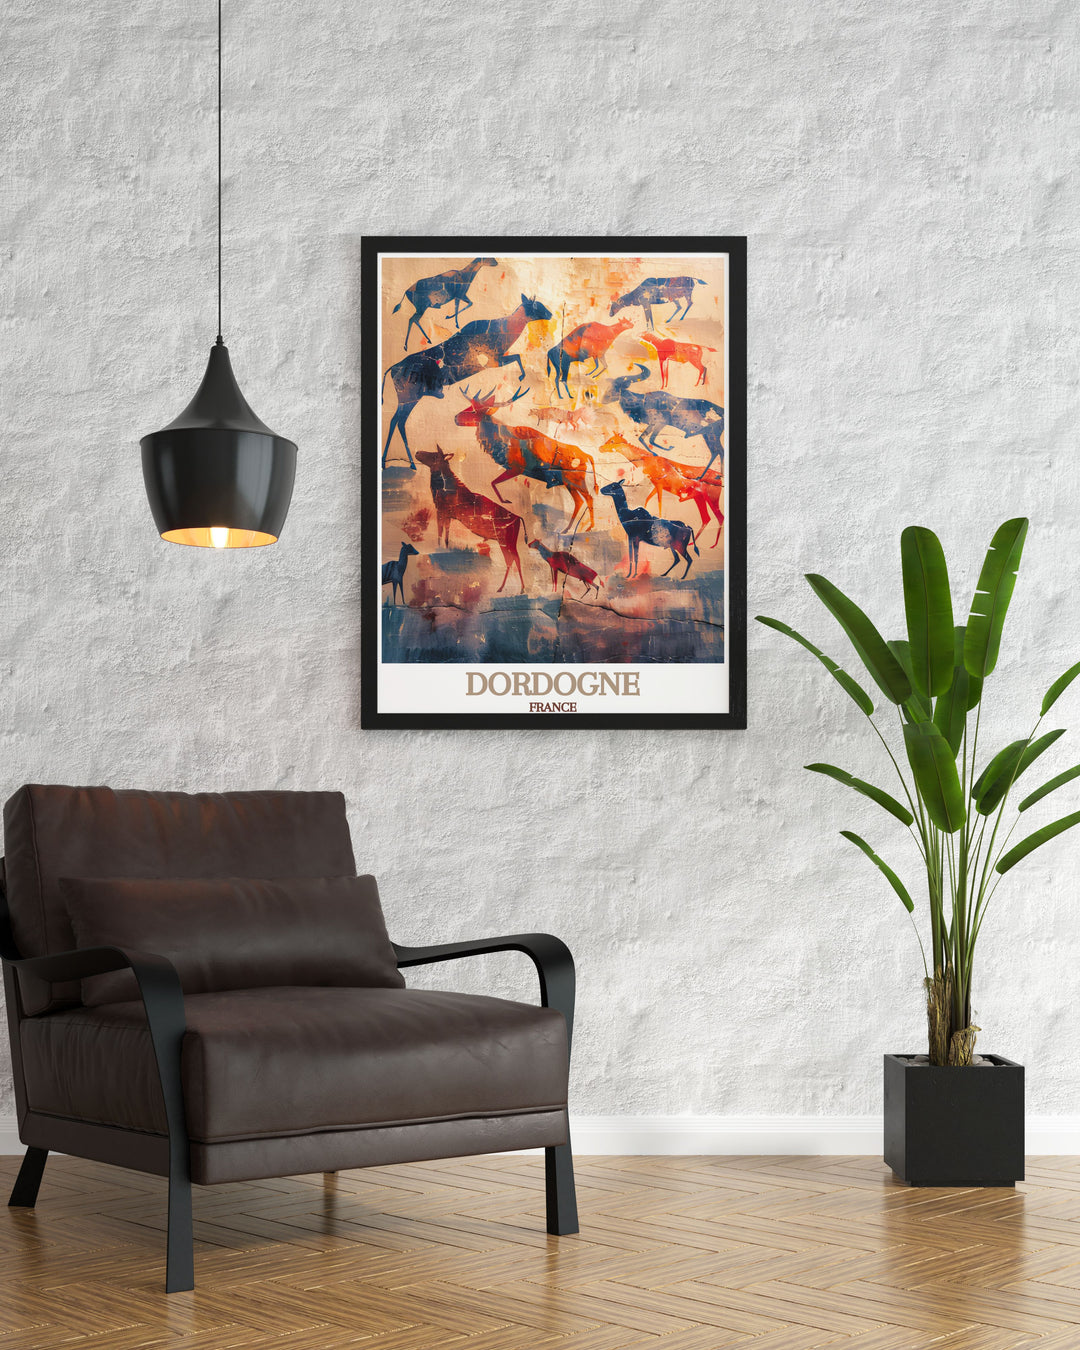 This art print of the Lascaux Caves showcases the fascinating prehistoric art, making it a perfect piece for adding a touch of ancient history to your decor.